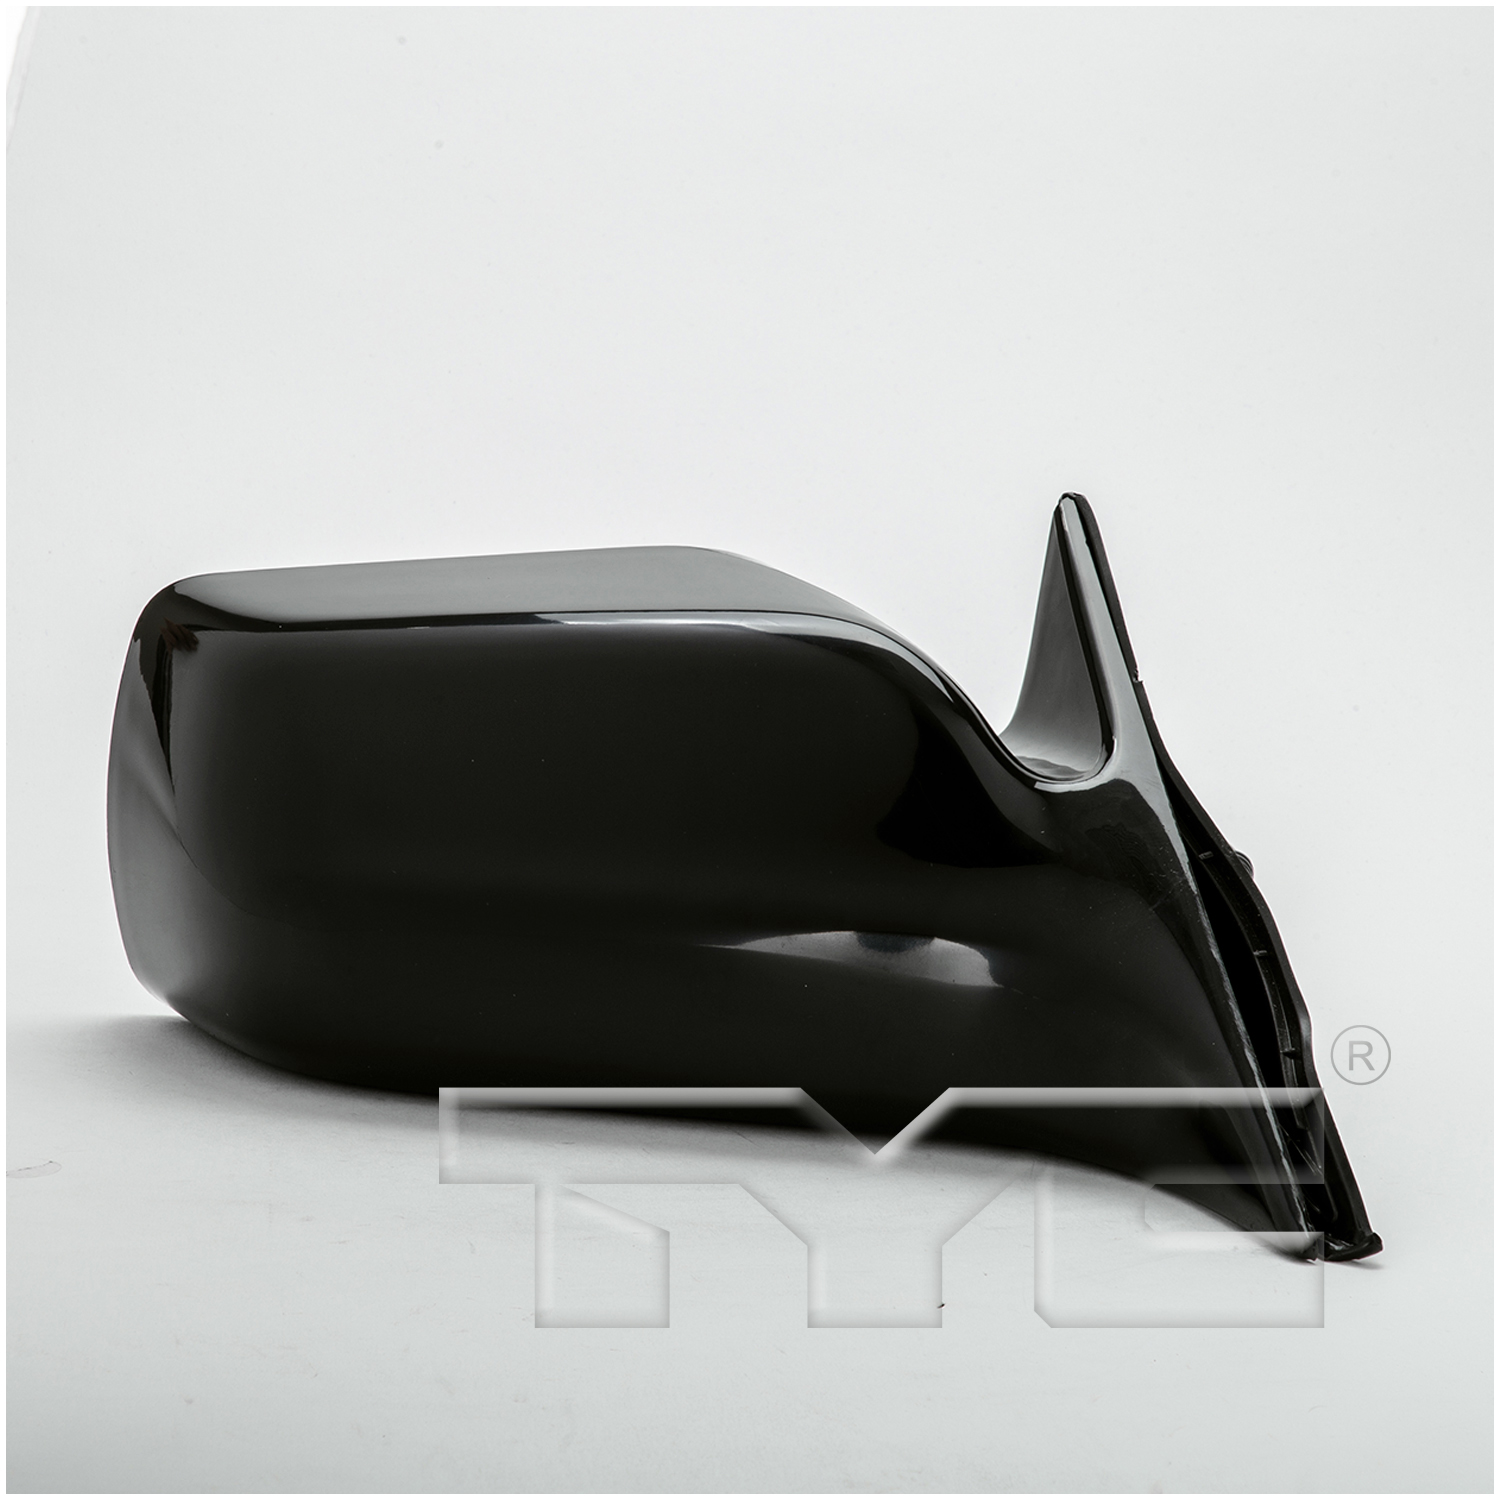 Aftermarket MIRRORS for TOYOTA - AVALON, AVALON,00-04,RT Mirror outside rear view